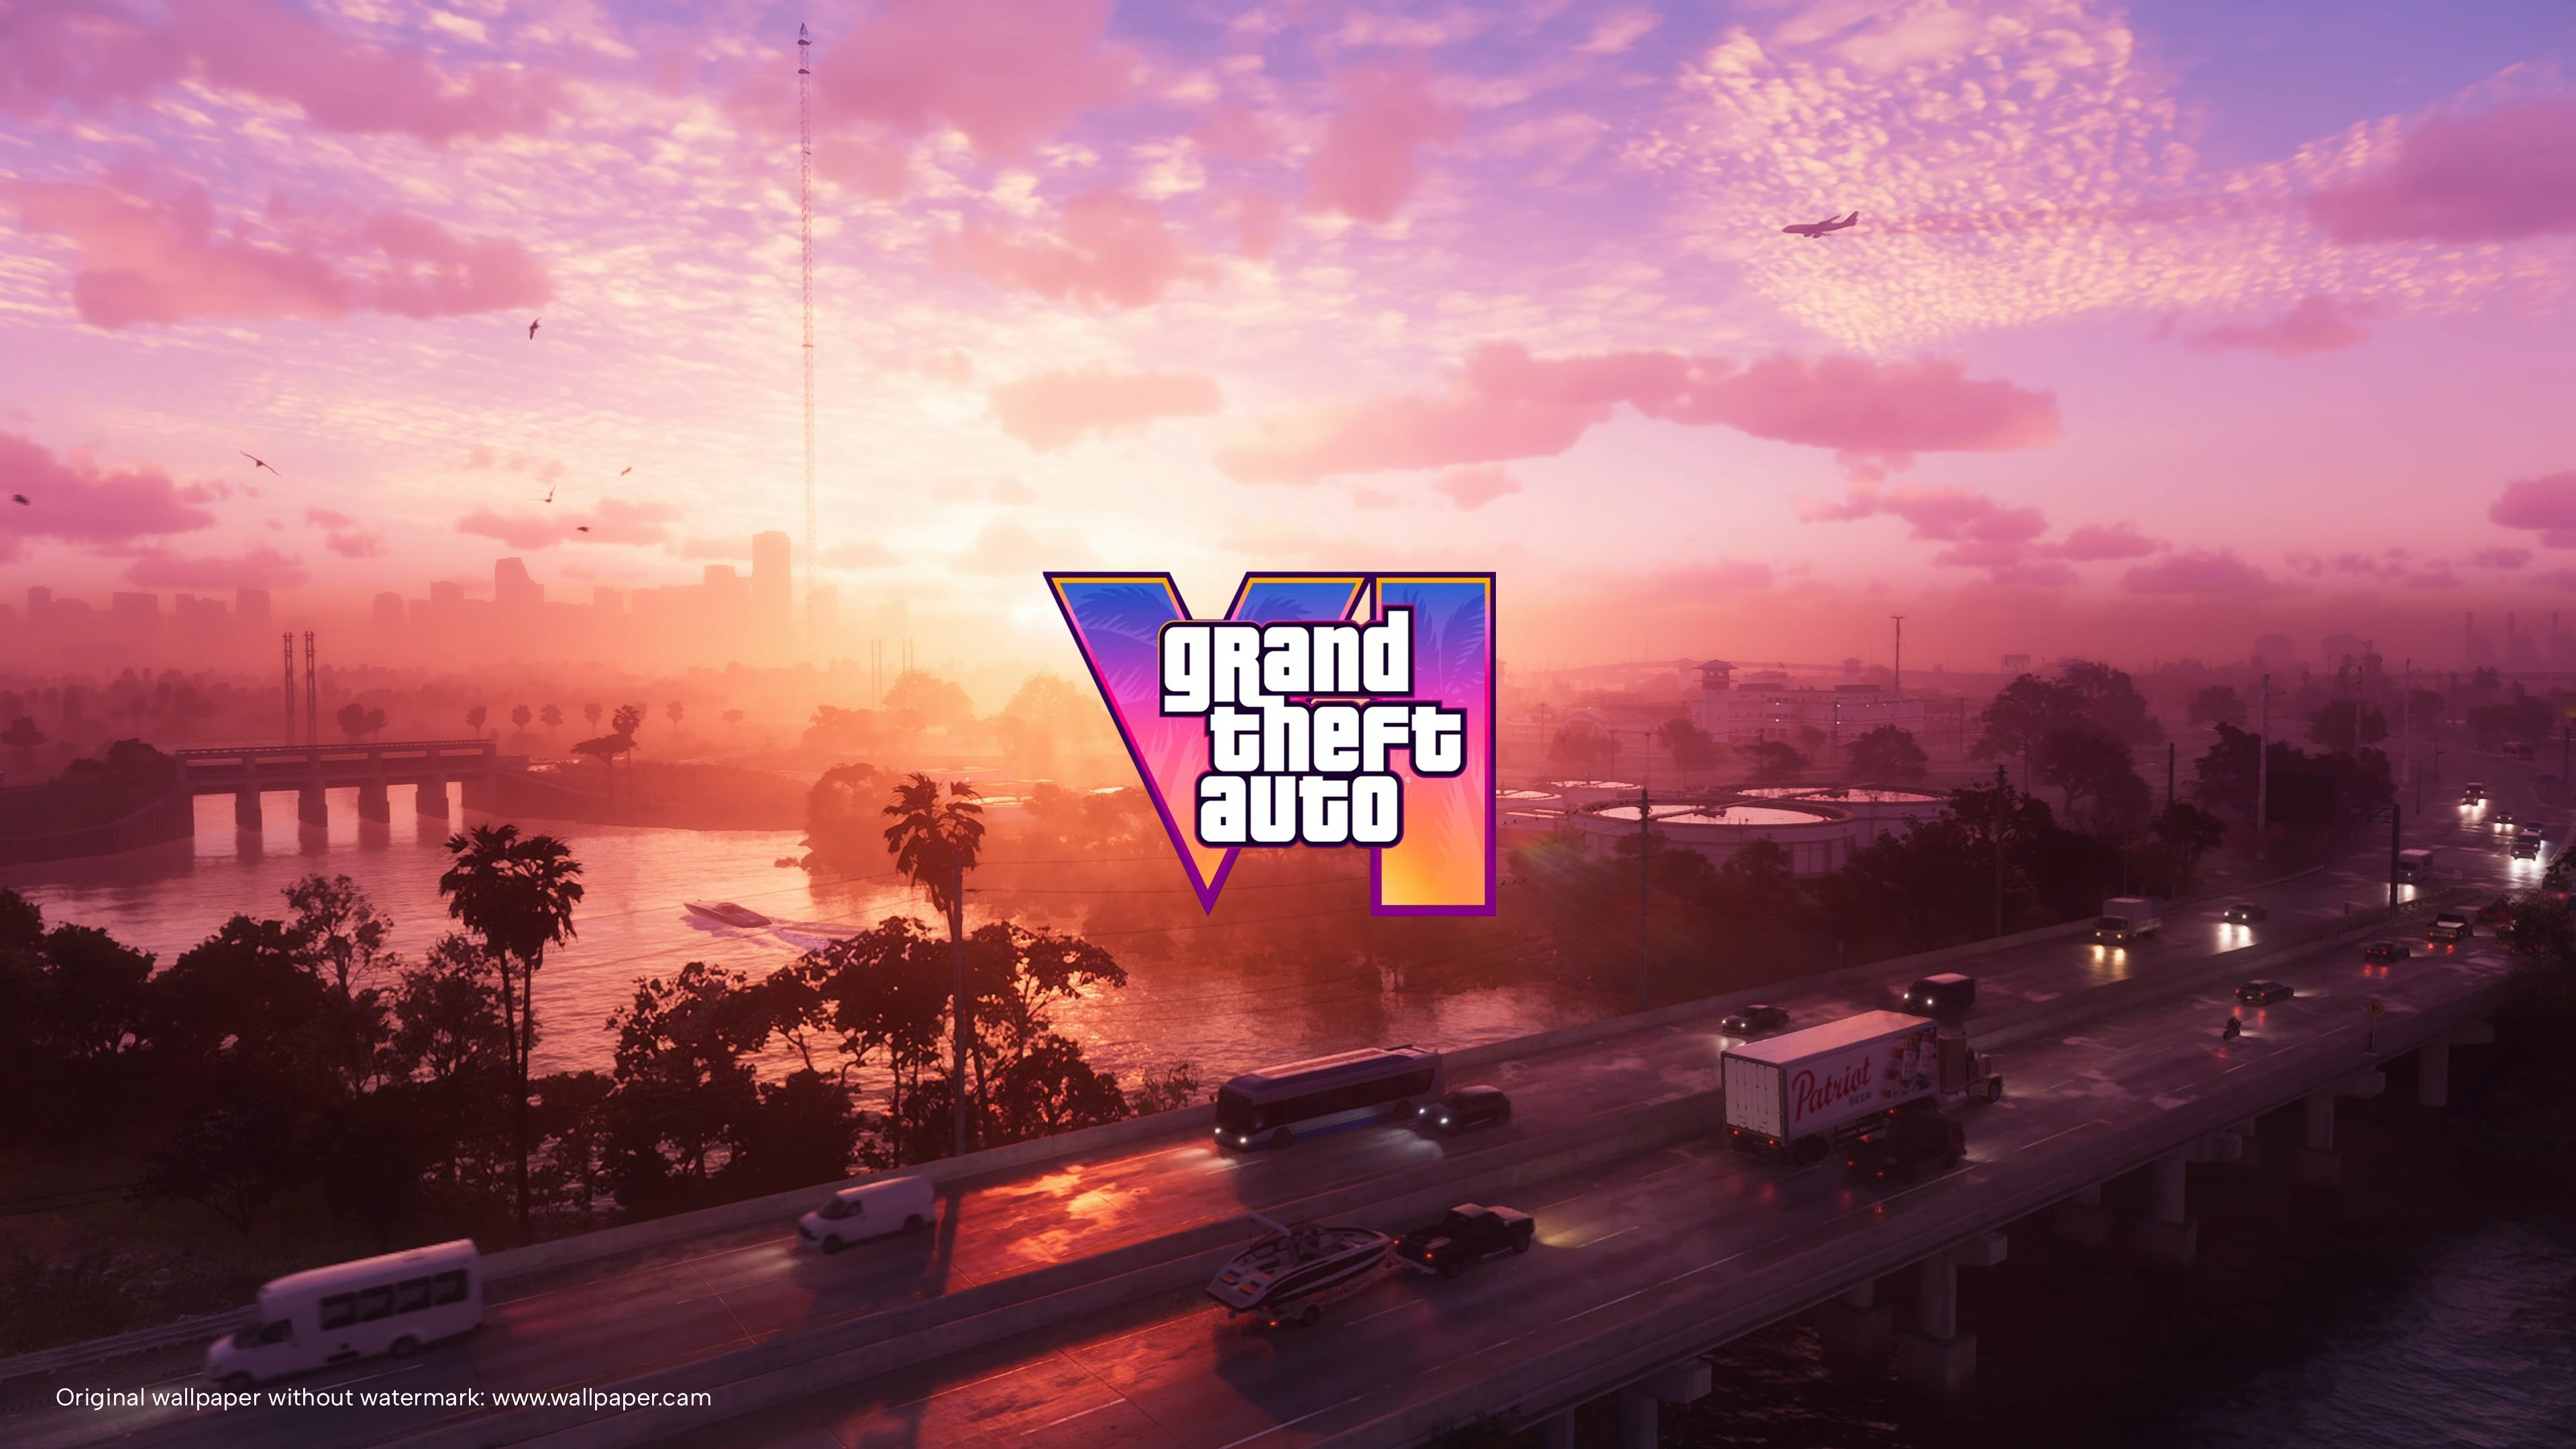 Grand Theft Auto Grand Theft Auto Vi Video Games Games Posters Sunset Sunset Glow Illustration Sunli 3840x2160